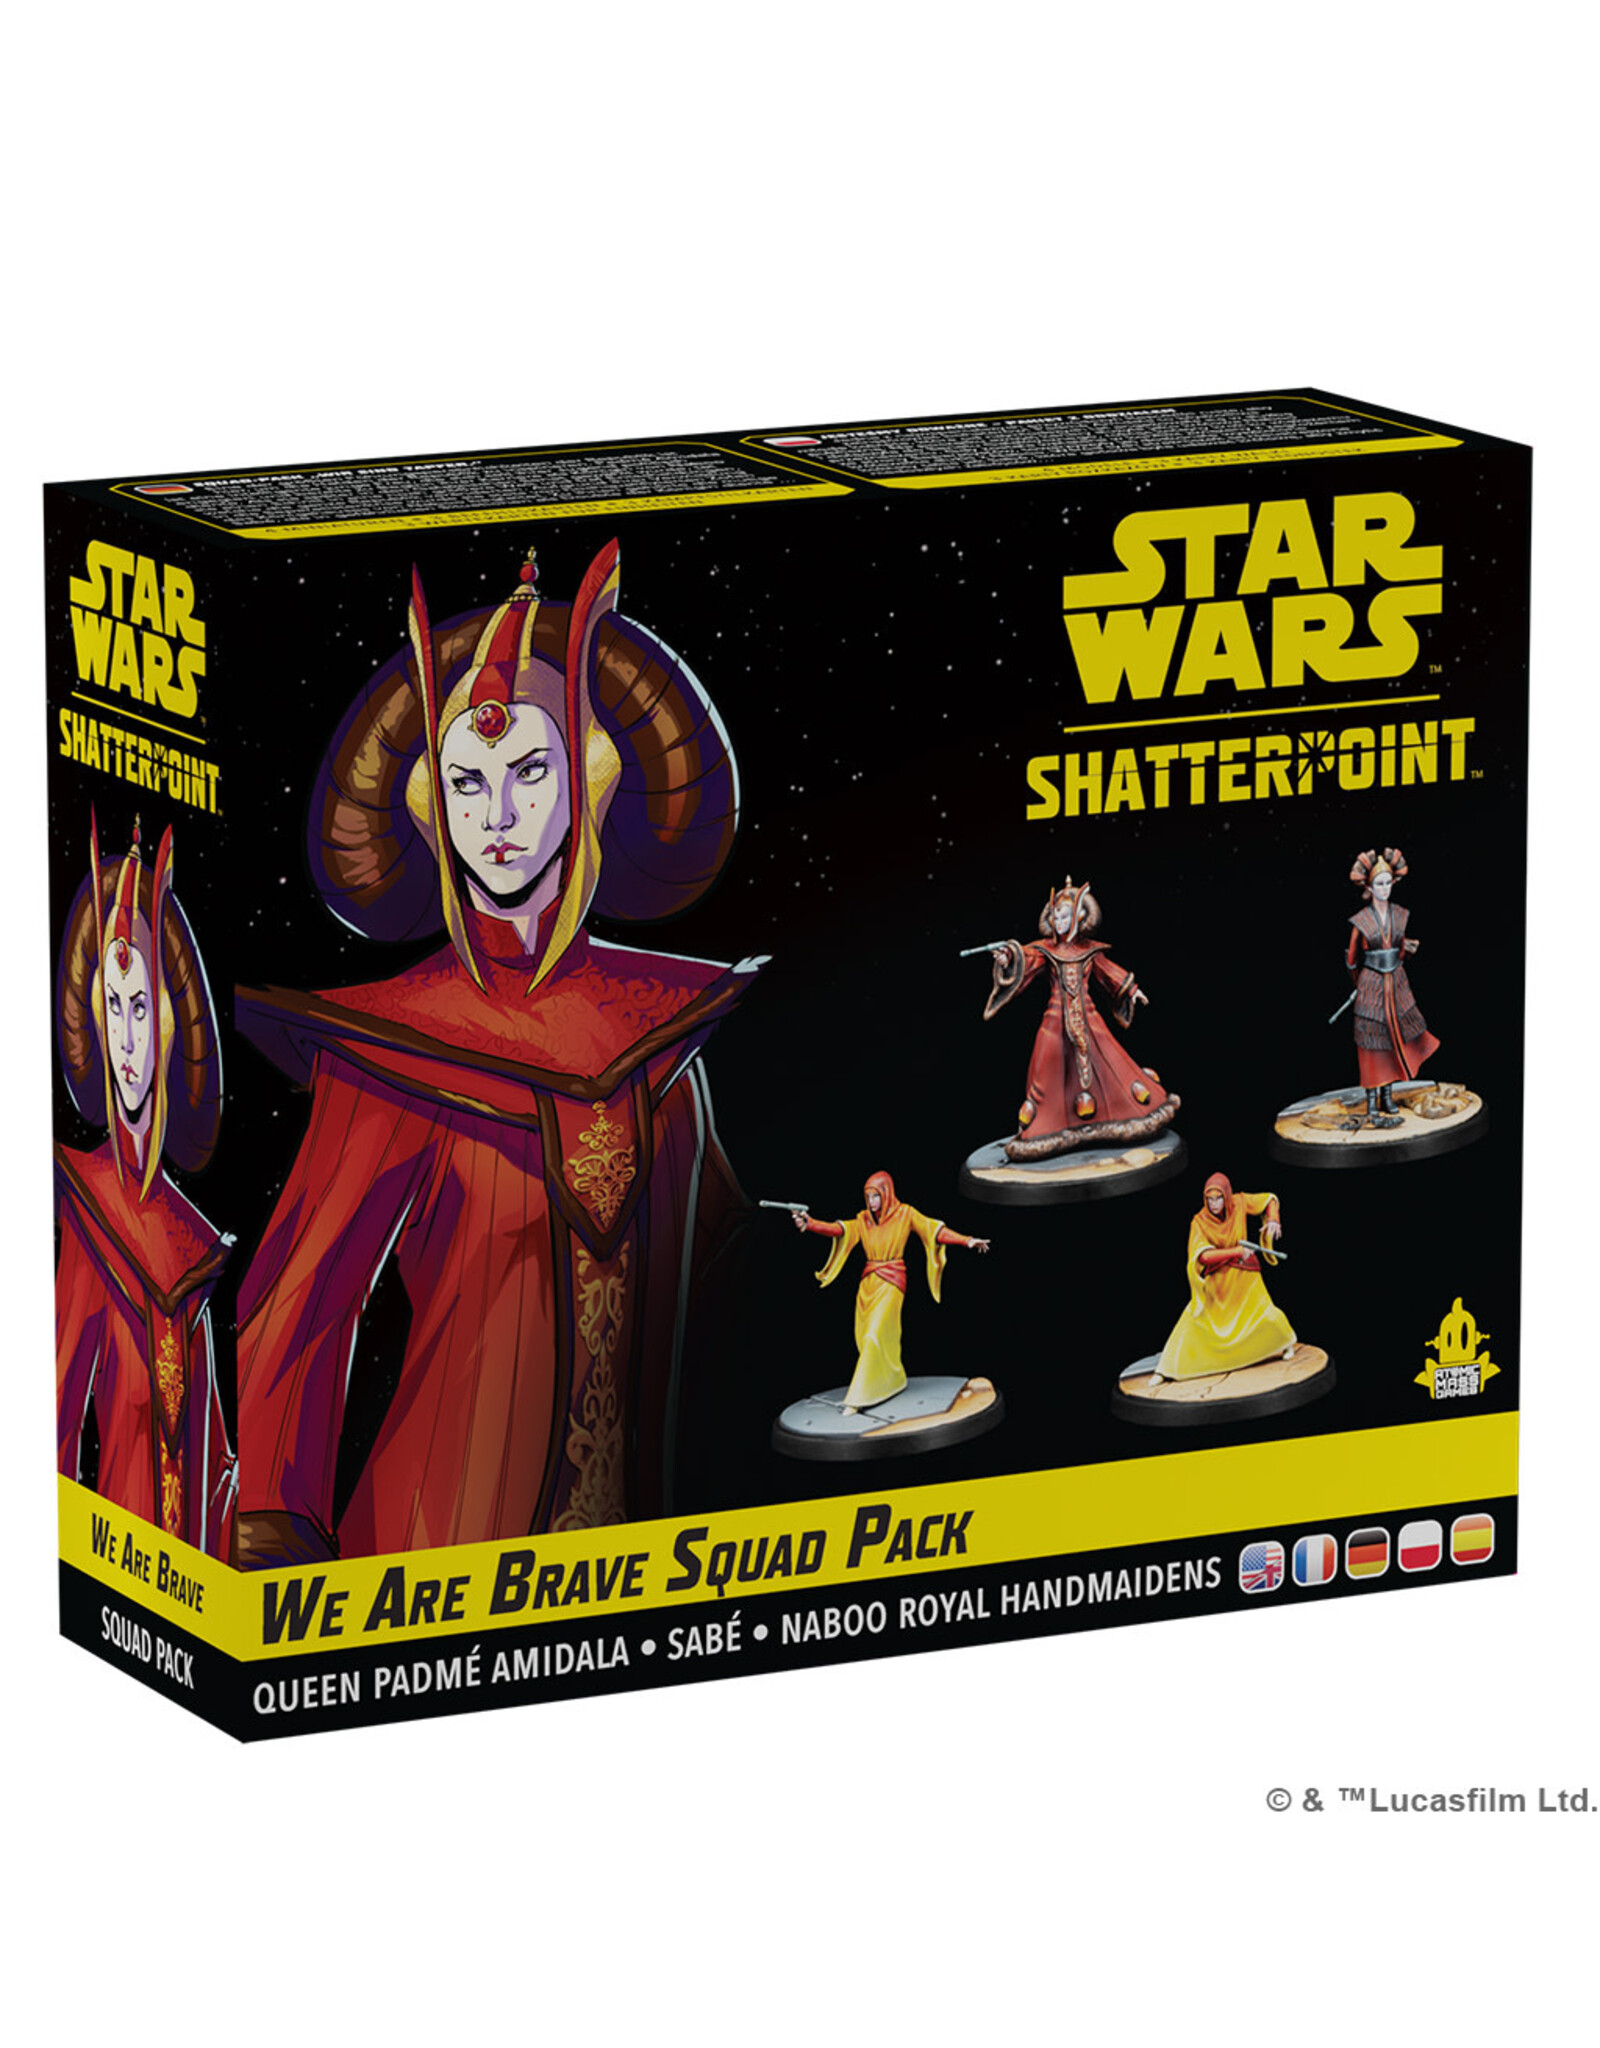 Star Wars Shatterpoint Star Wars Shatterpoint  We Are Brave Squad Pack